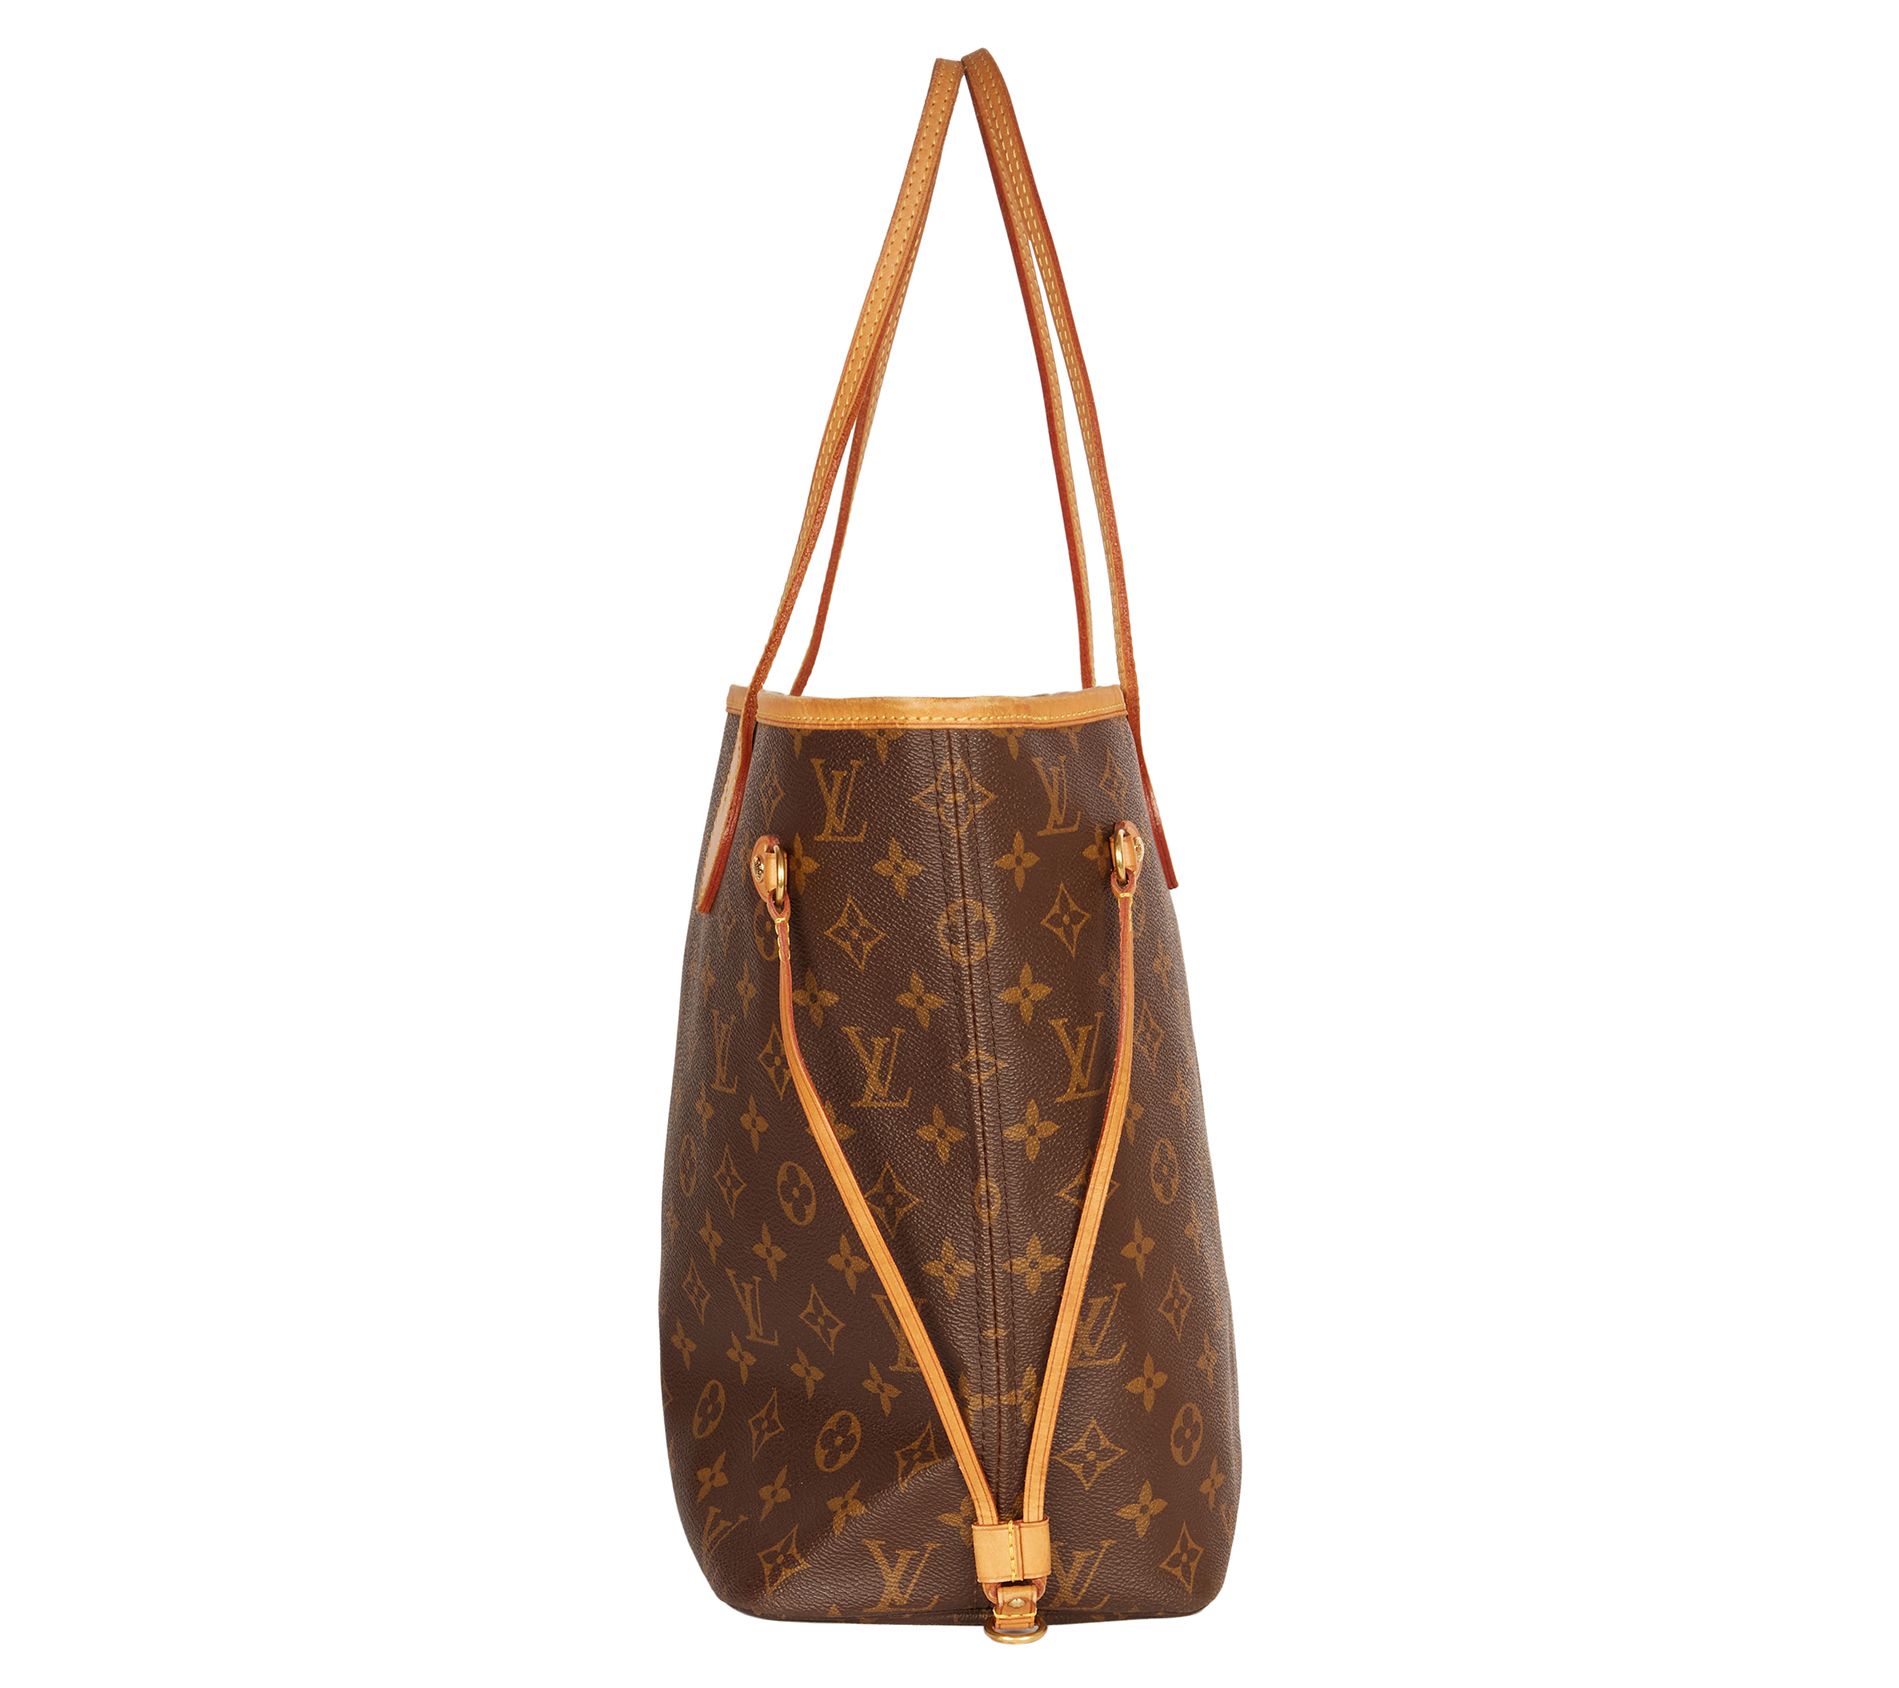 LOUIS VUITTON GAME ON COLLECTION MORE SNEAK PEAKS- NEVERFULL